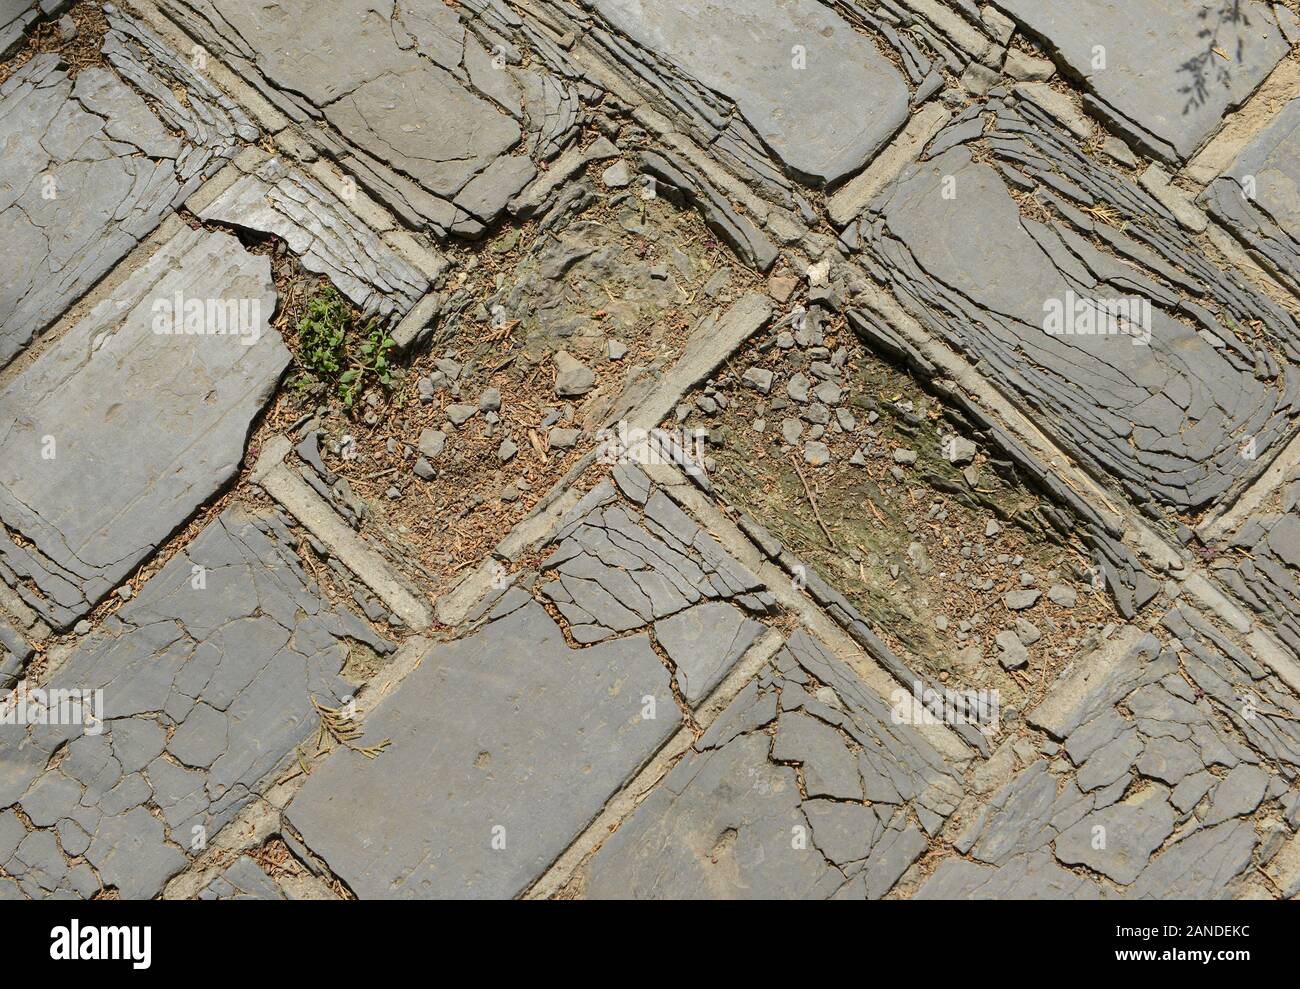 Paving bricks damaged by very heavy use at the Temple of Heaven in Beijing, China Stock Photo